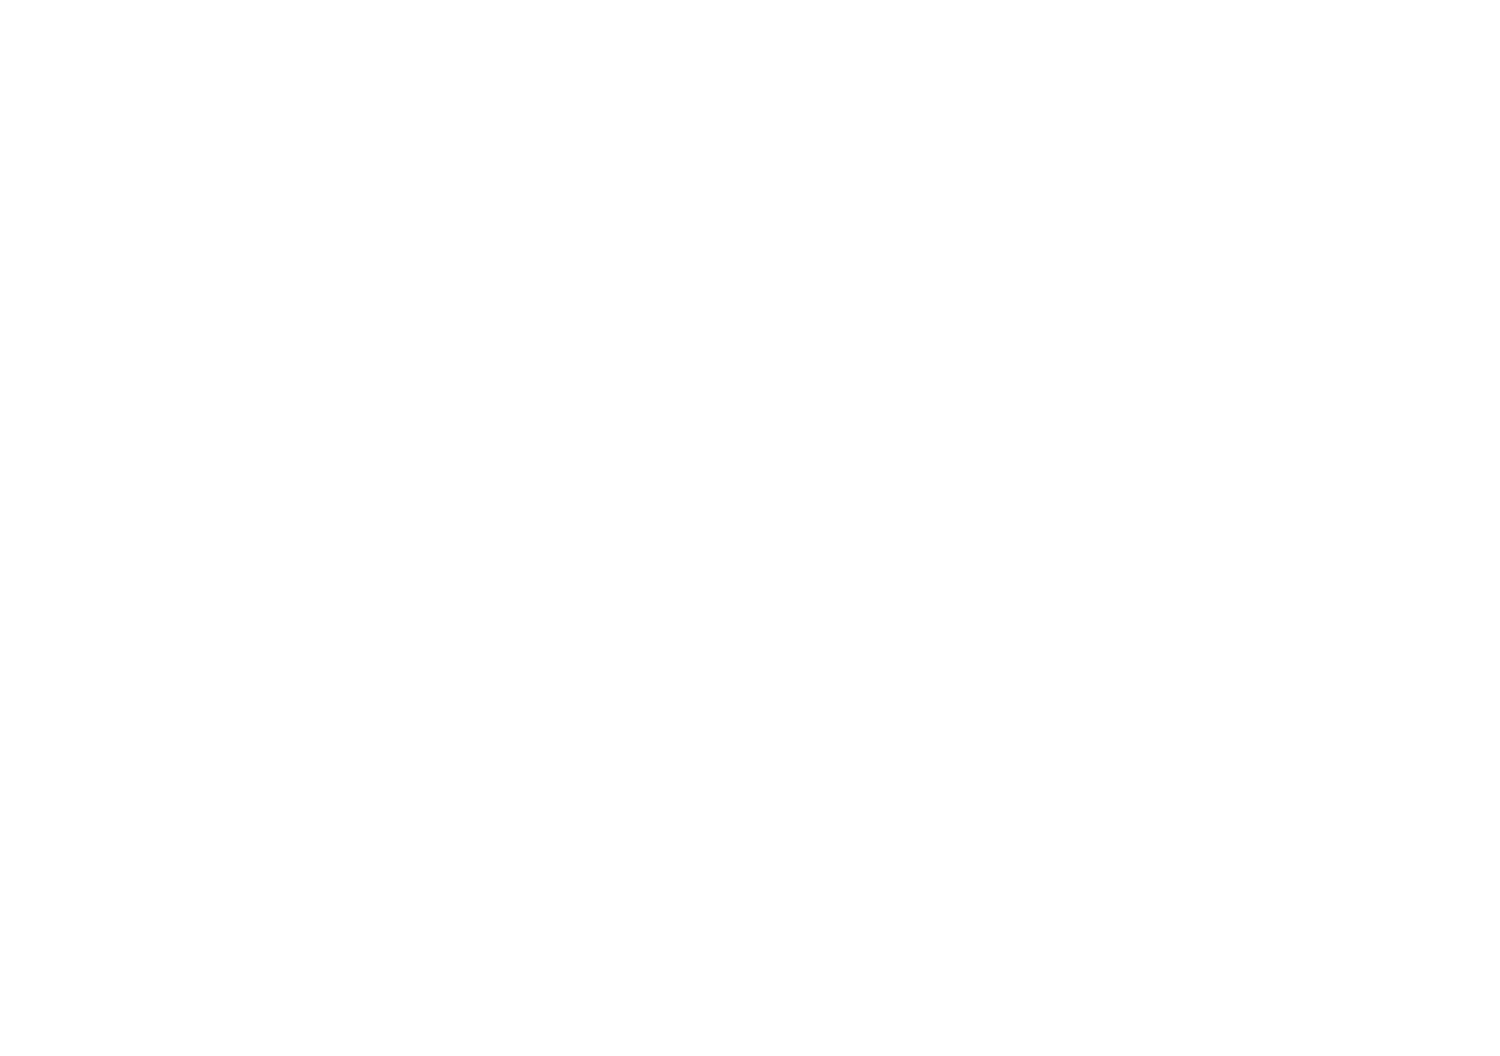 The Arena Group NL